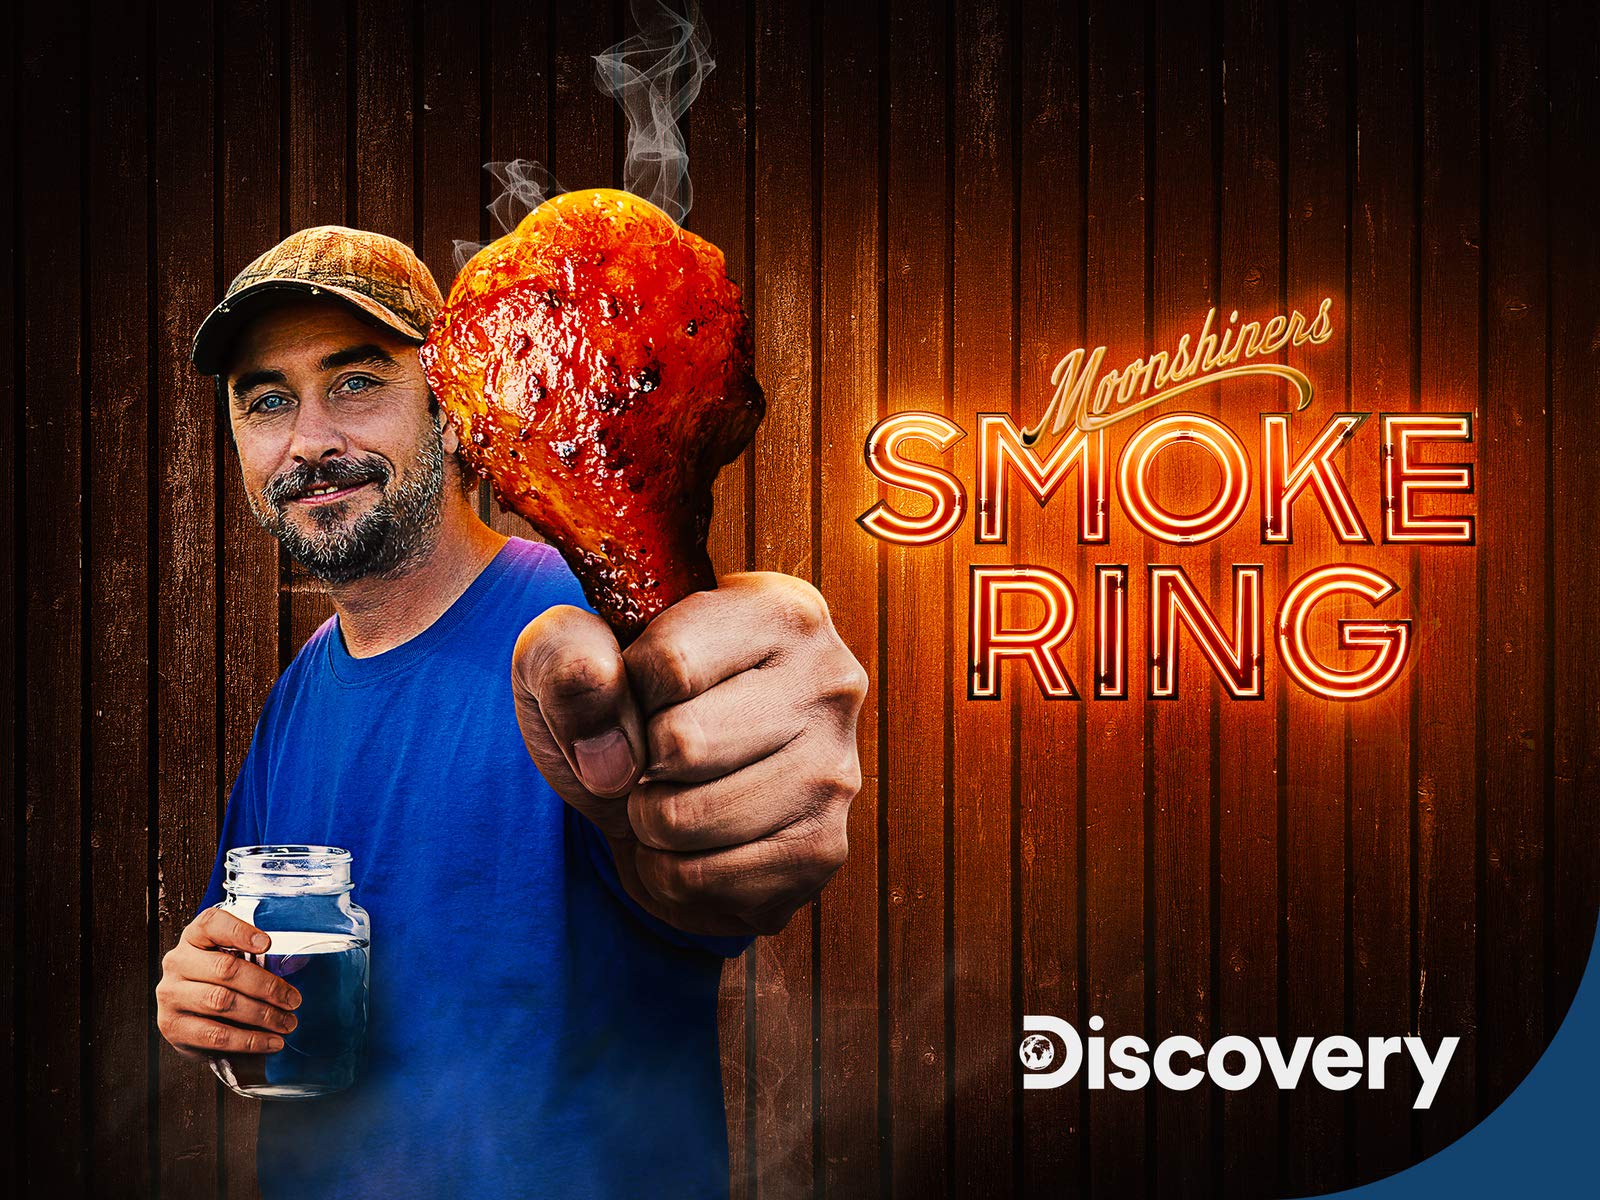 Moonshiners Smoke Ring Release Date? Discovery Plus Season 1 Premiere